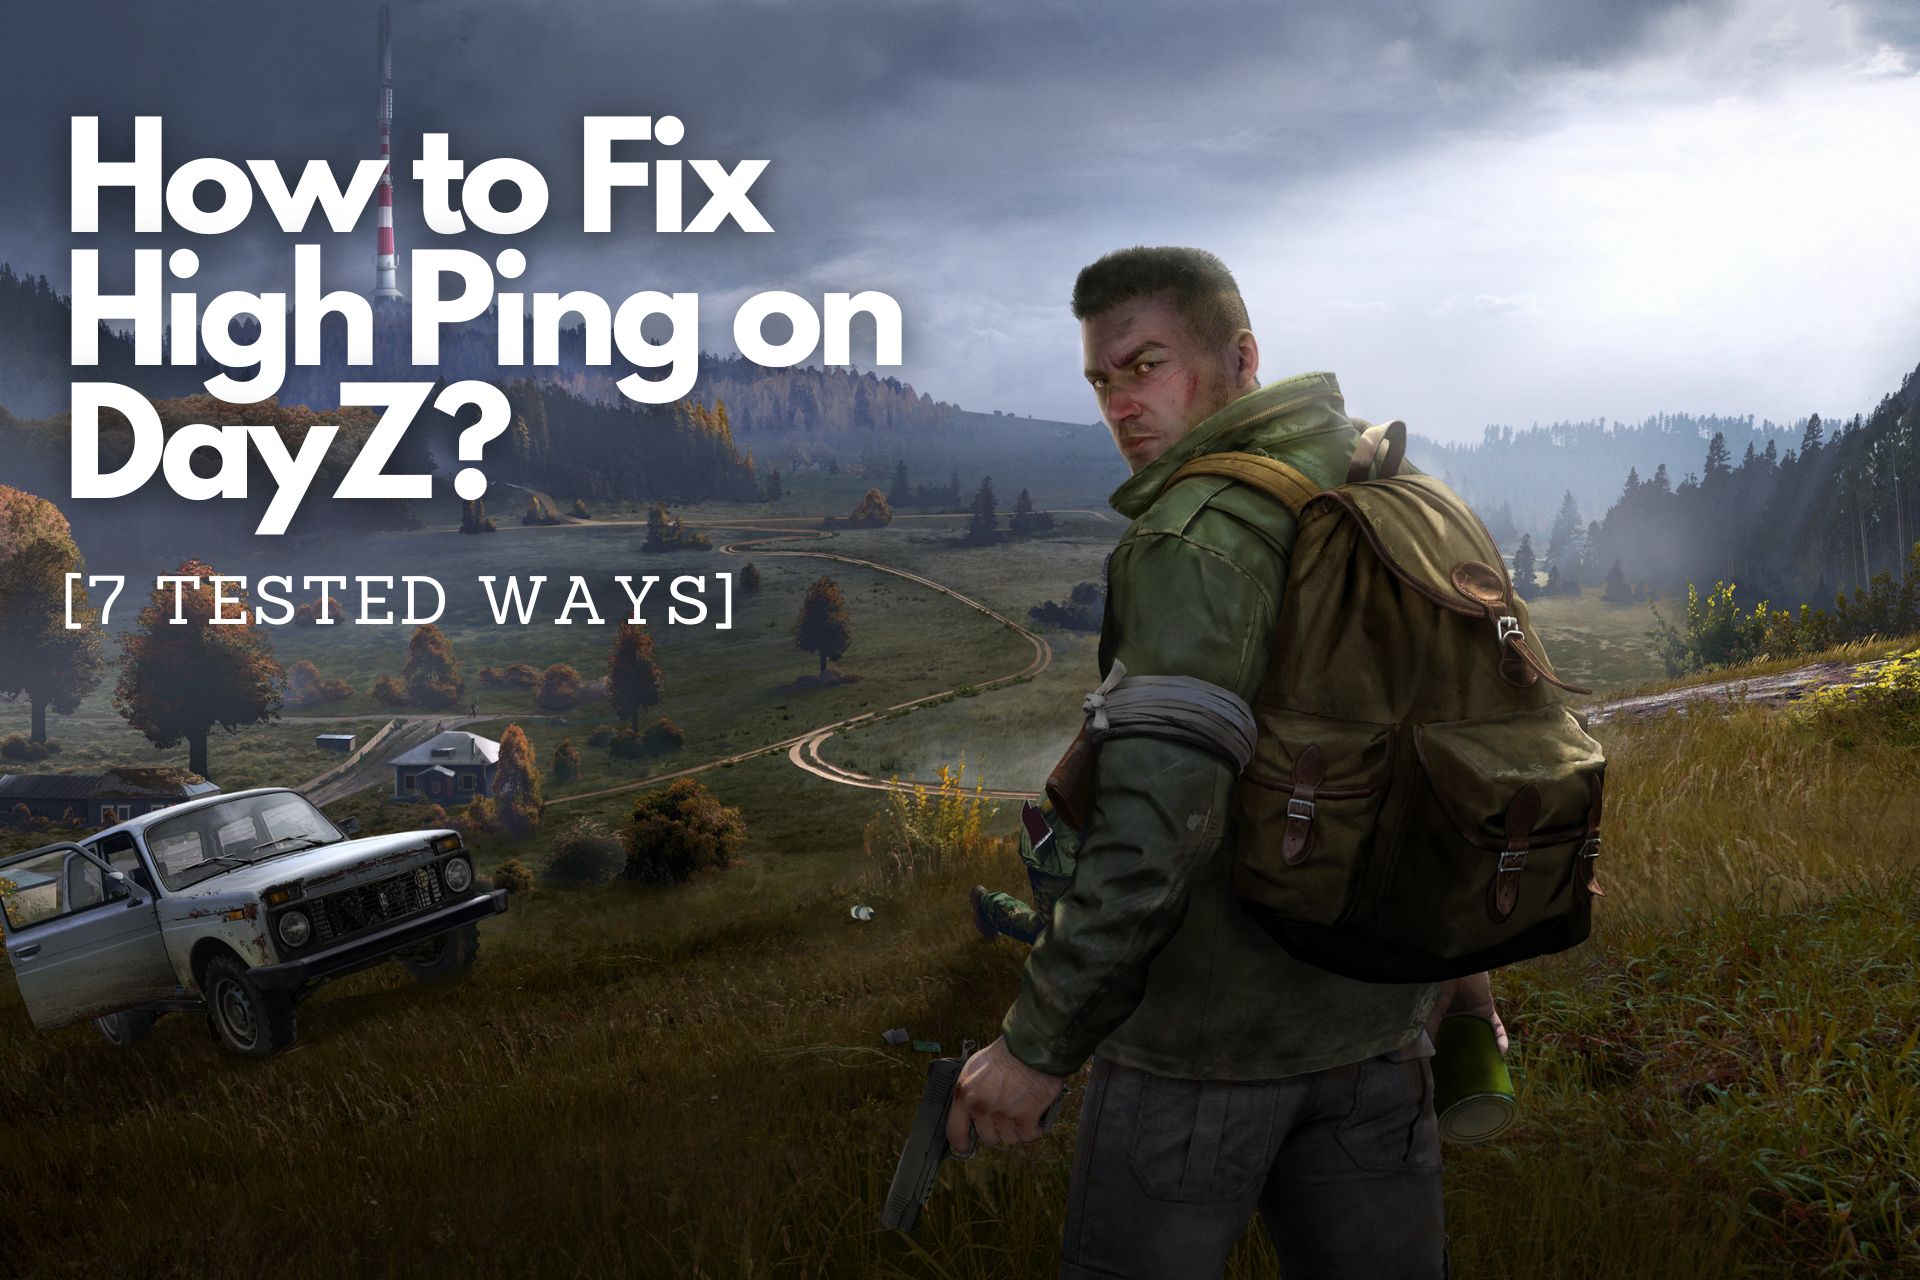 How to Fix High Ping on DayZ? 7 Tested Ways